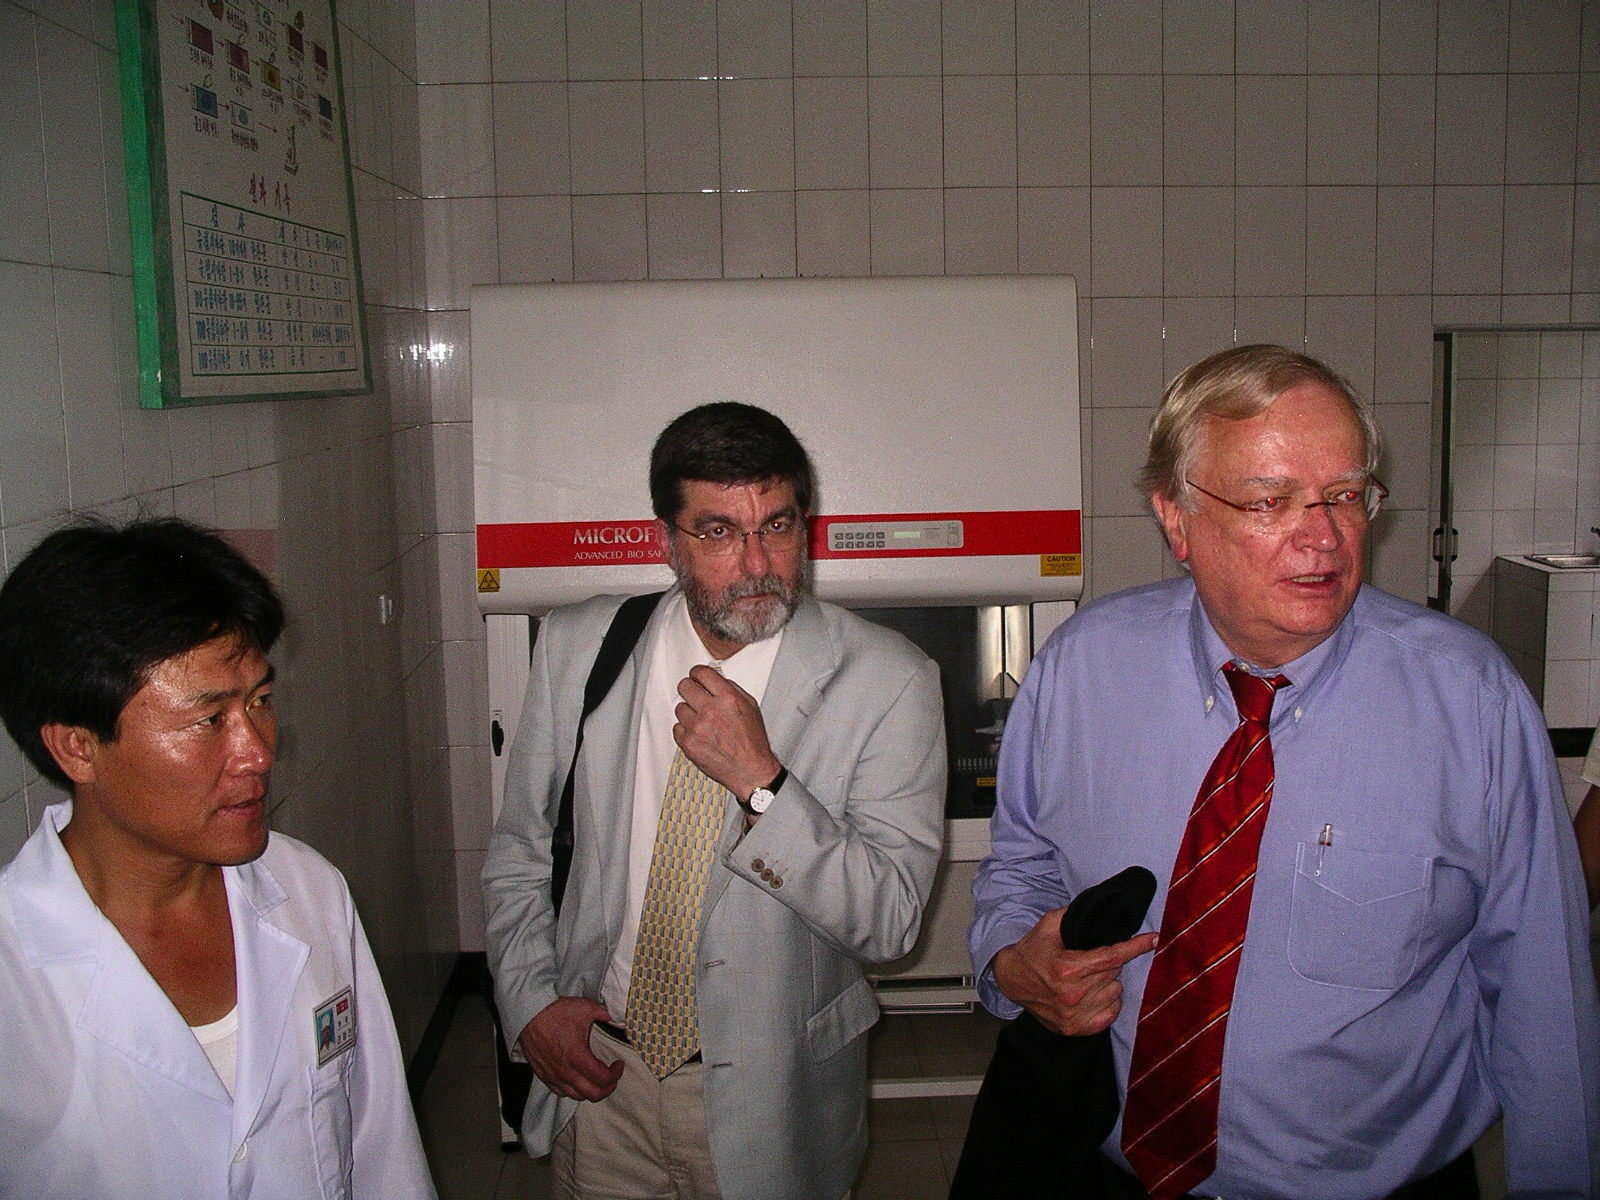 Two Americans and North Korean man in white doctor gown in a hospital hallway